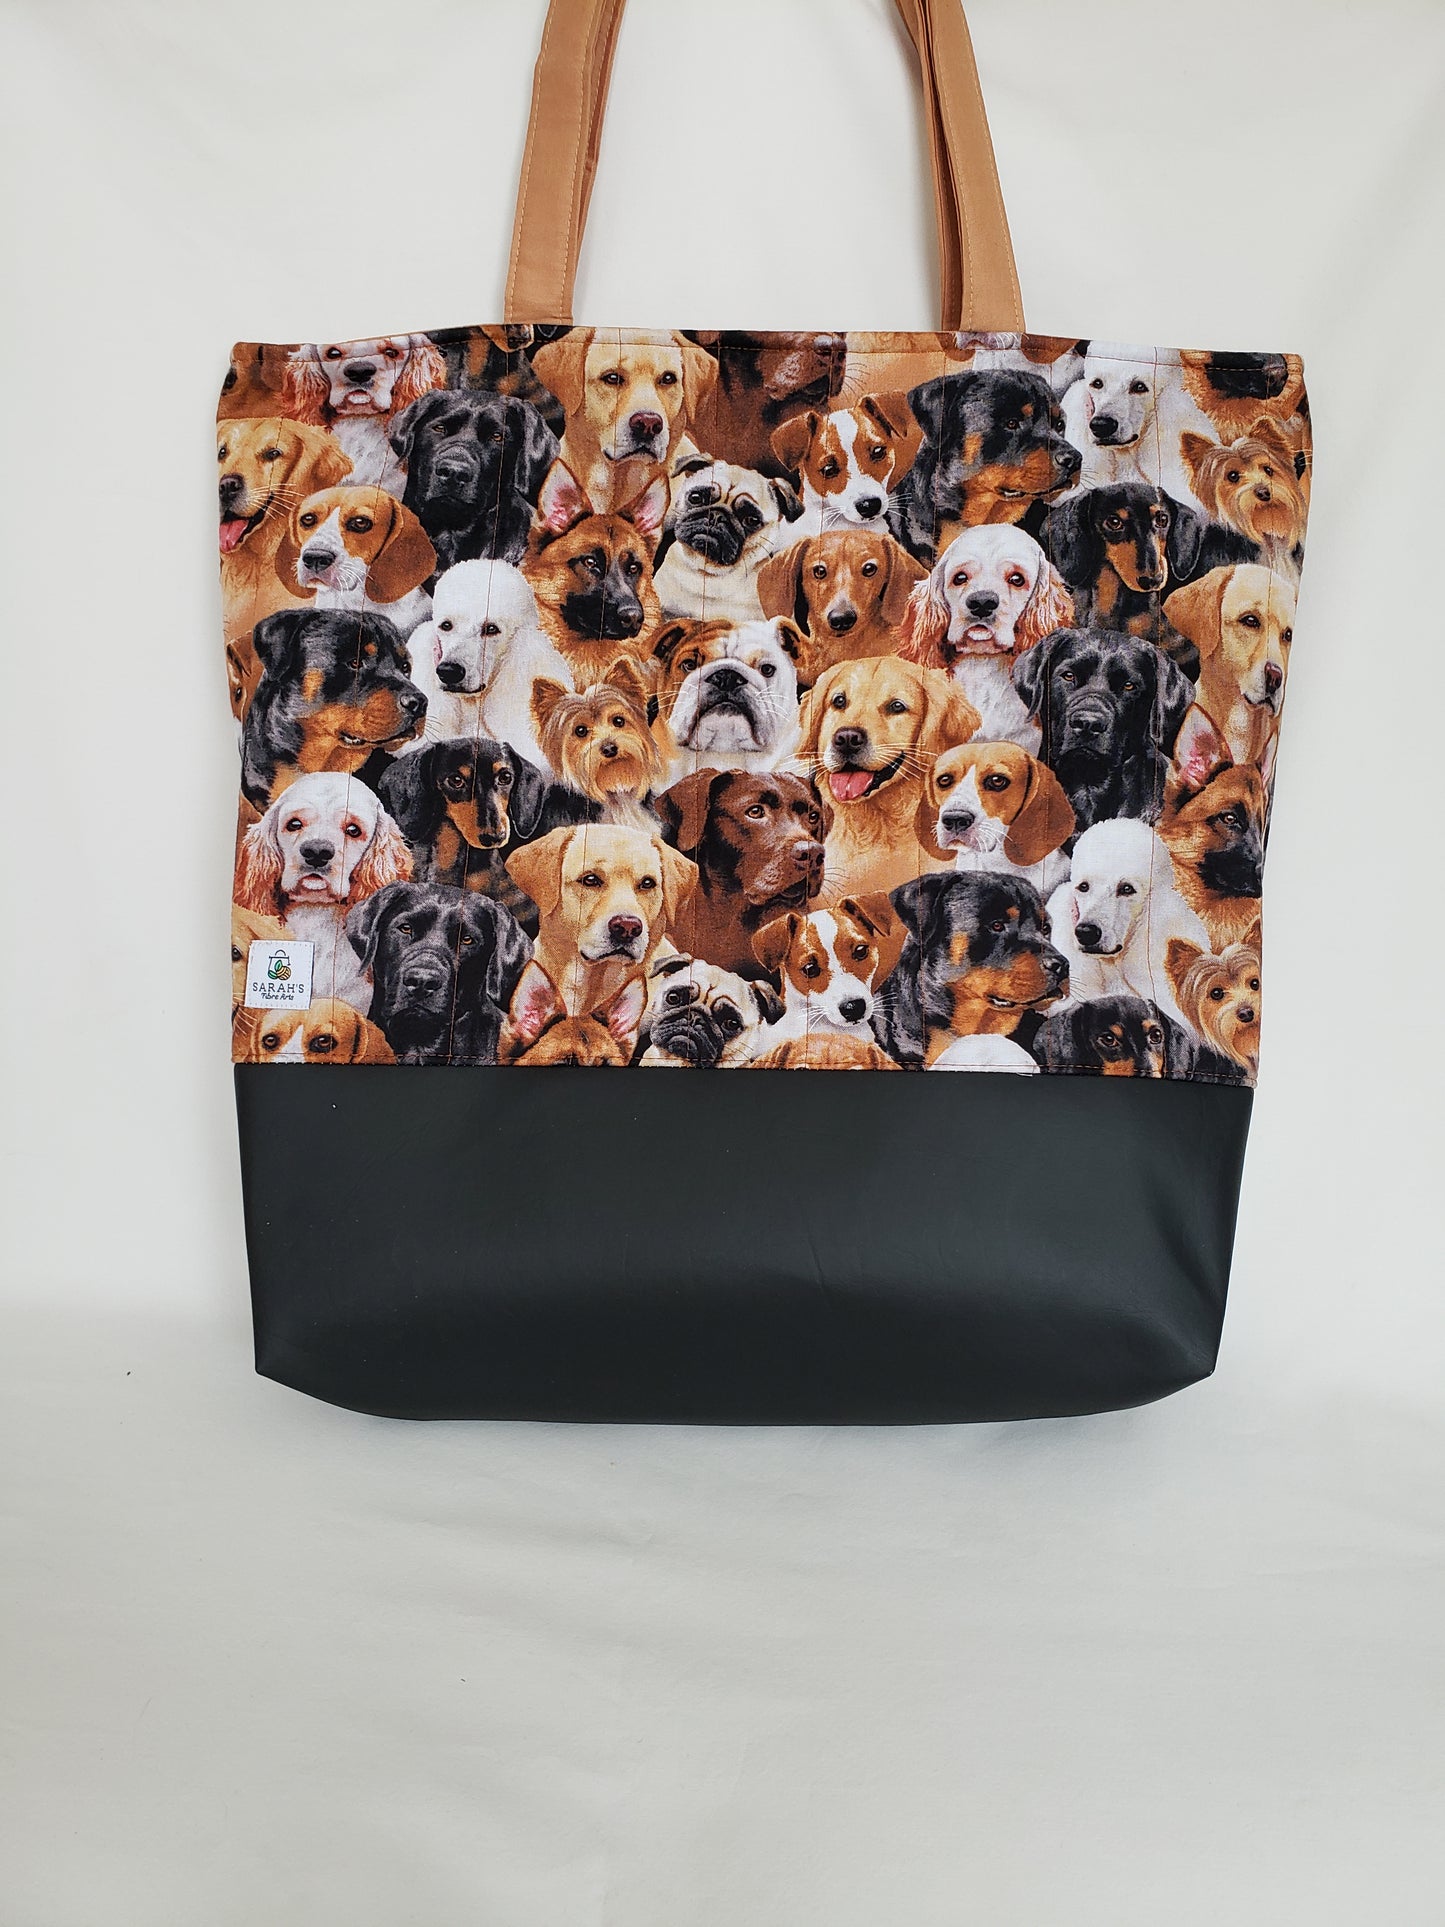 Tote bag, Dogs Tote Bag, Quilted Tote Bag, Dog Tote Bag